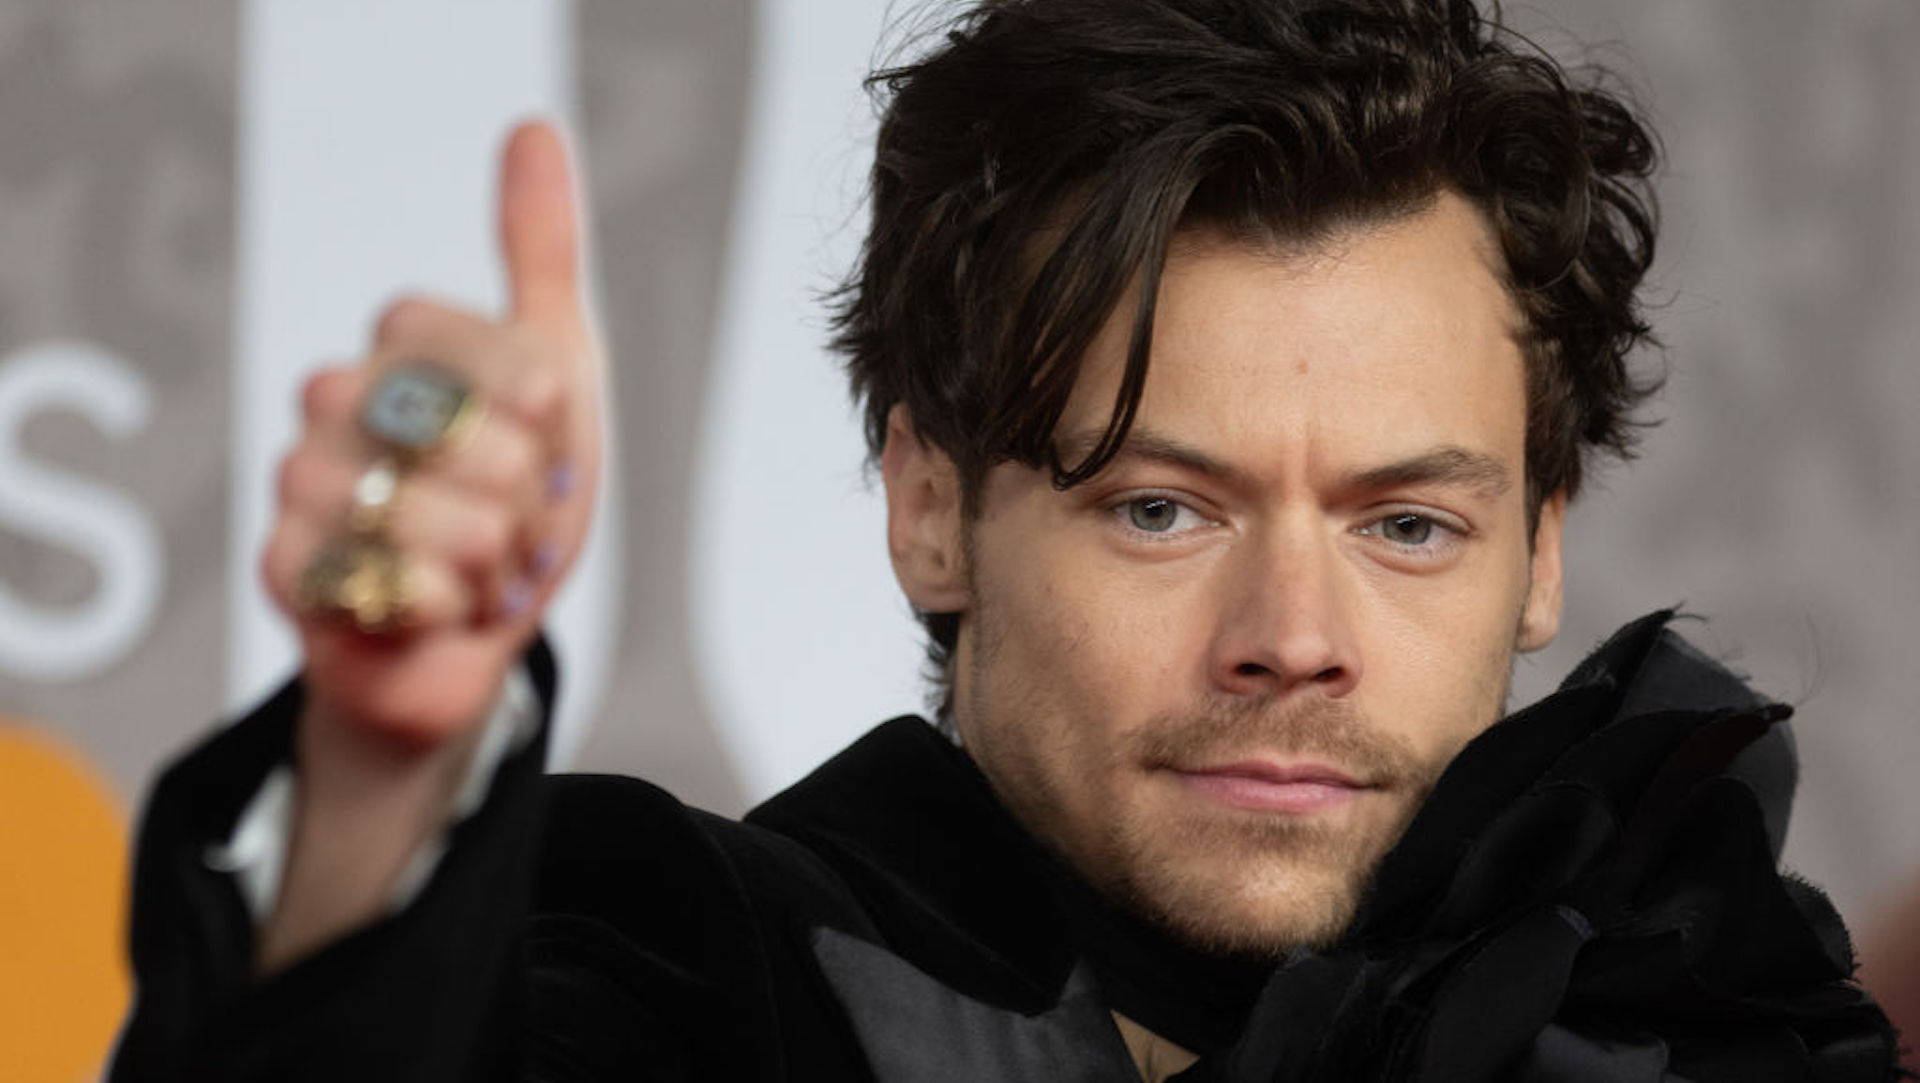 LONDON, ENGLAND - FEBRUARY 11: (EDITORIAL USE ONLY) Harry Styles attends The BRIT Awards 2023 at The O2 Arena on February 11, 2023 in London, England. (Photo by Samir Hussein/WireImage)